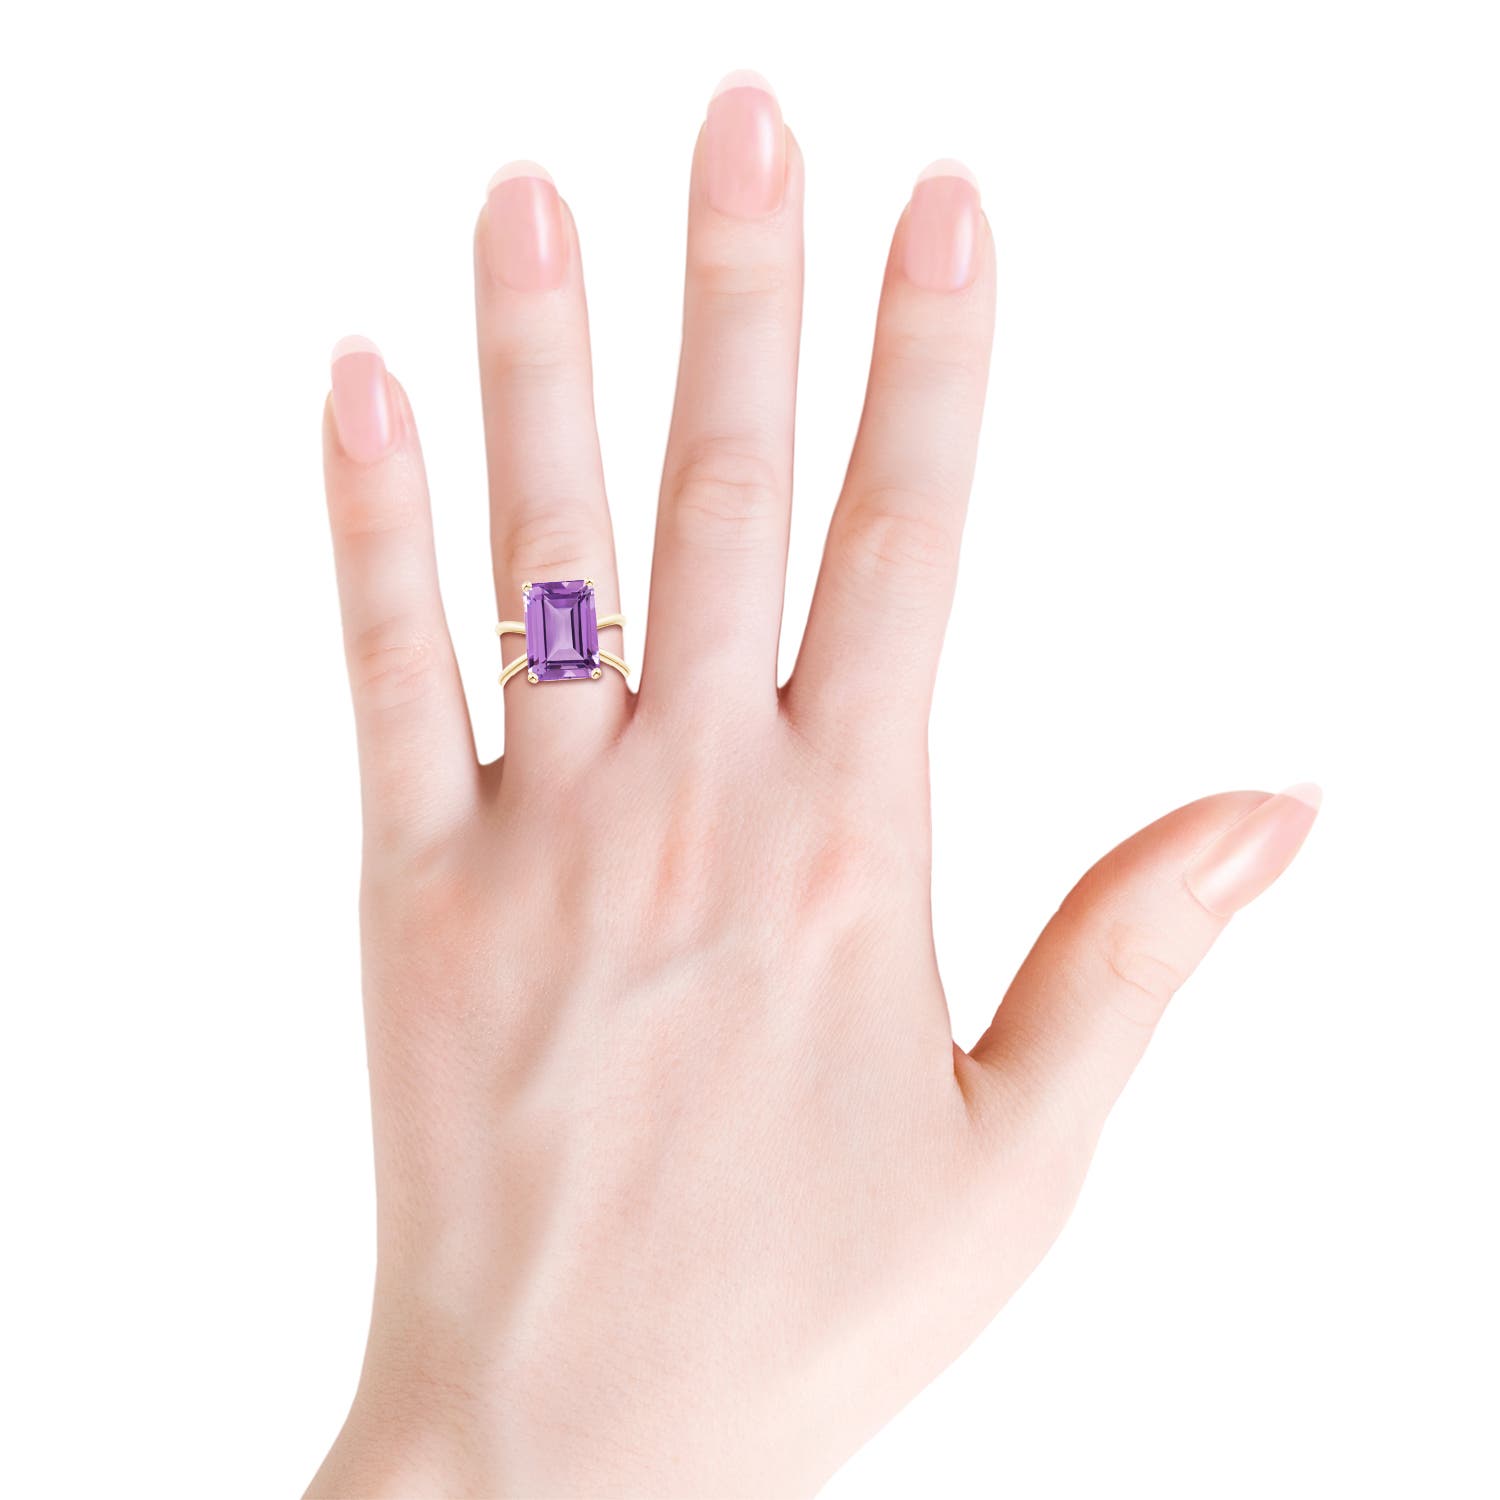 A - Amethyst / 6.5 CT / 14 KT Yellow Gold